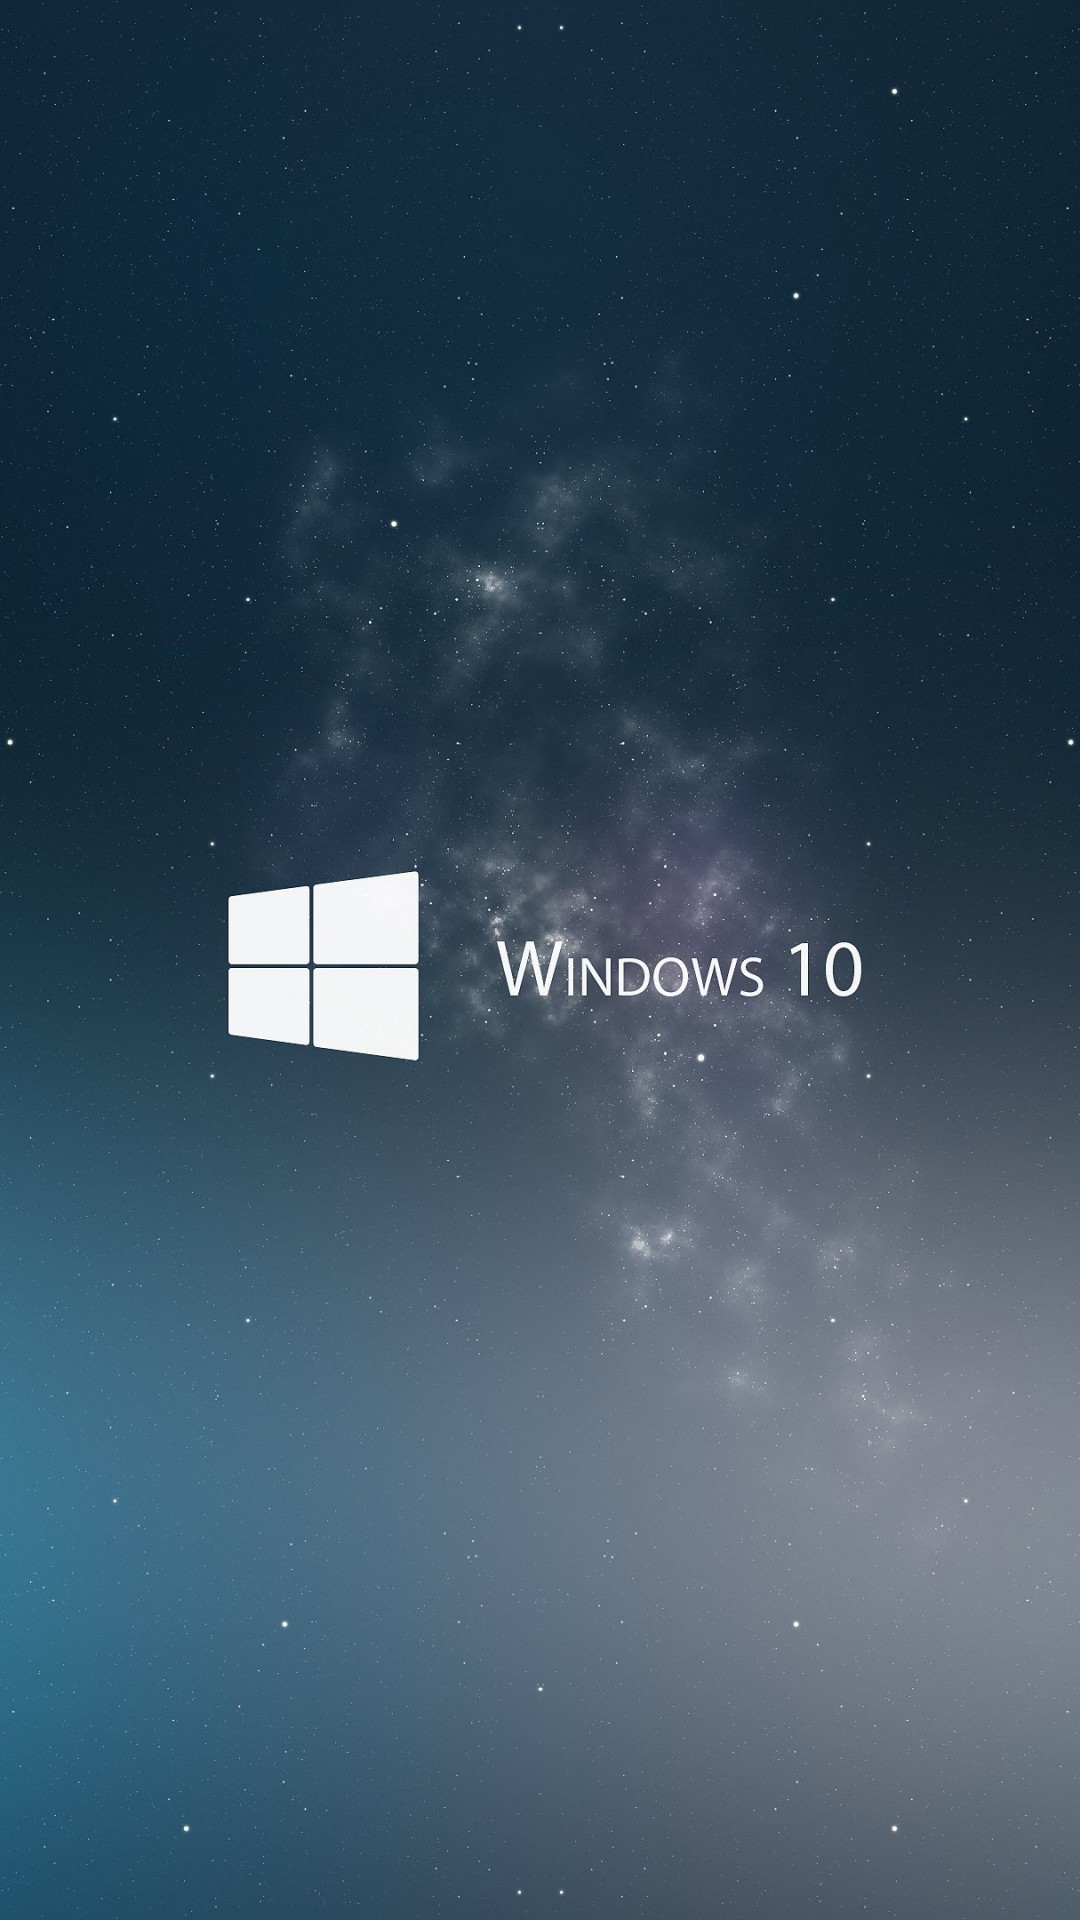 Windows 10 Wallpaper for HTC One